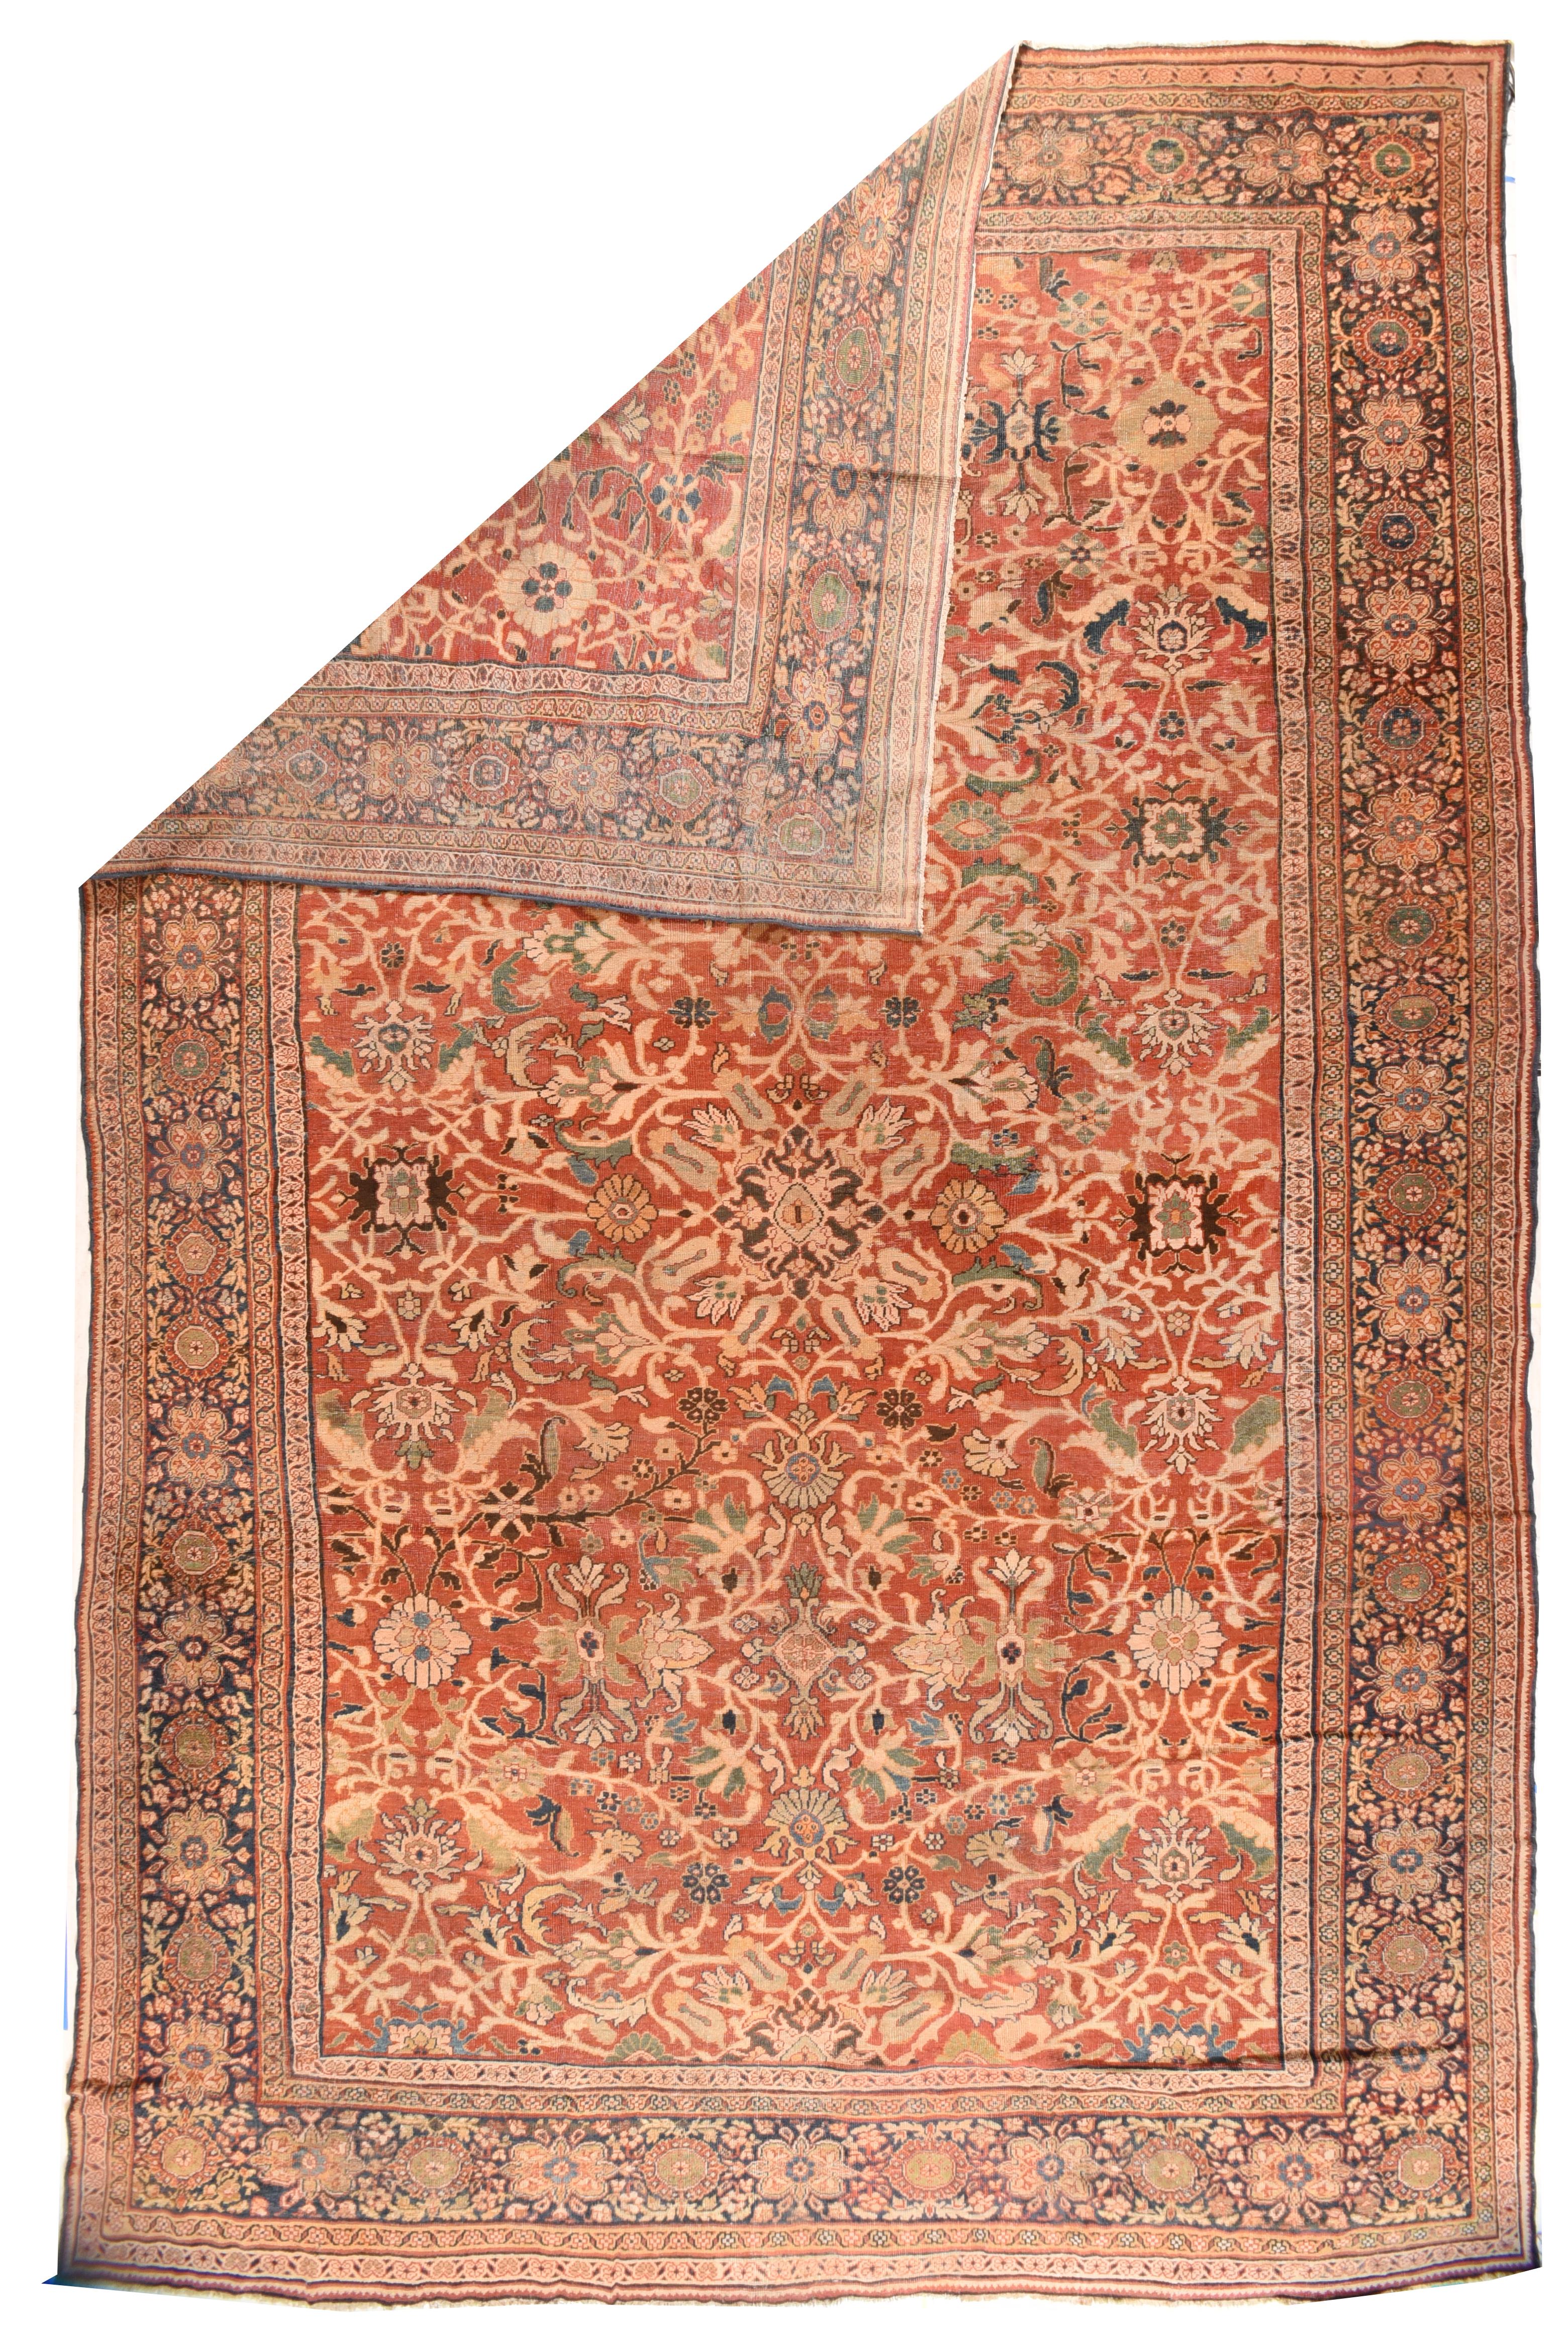 Antique Mahal Soultanabad Rug 12'7'' x 19'8''.